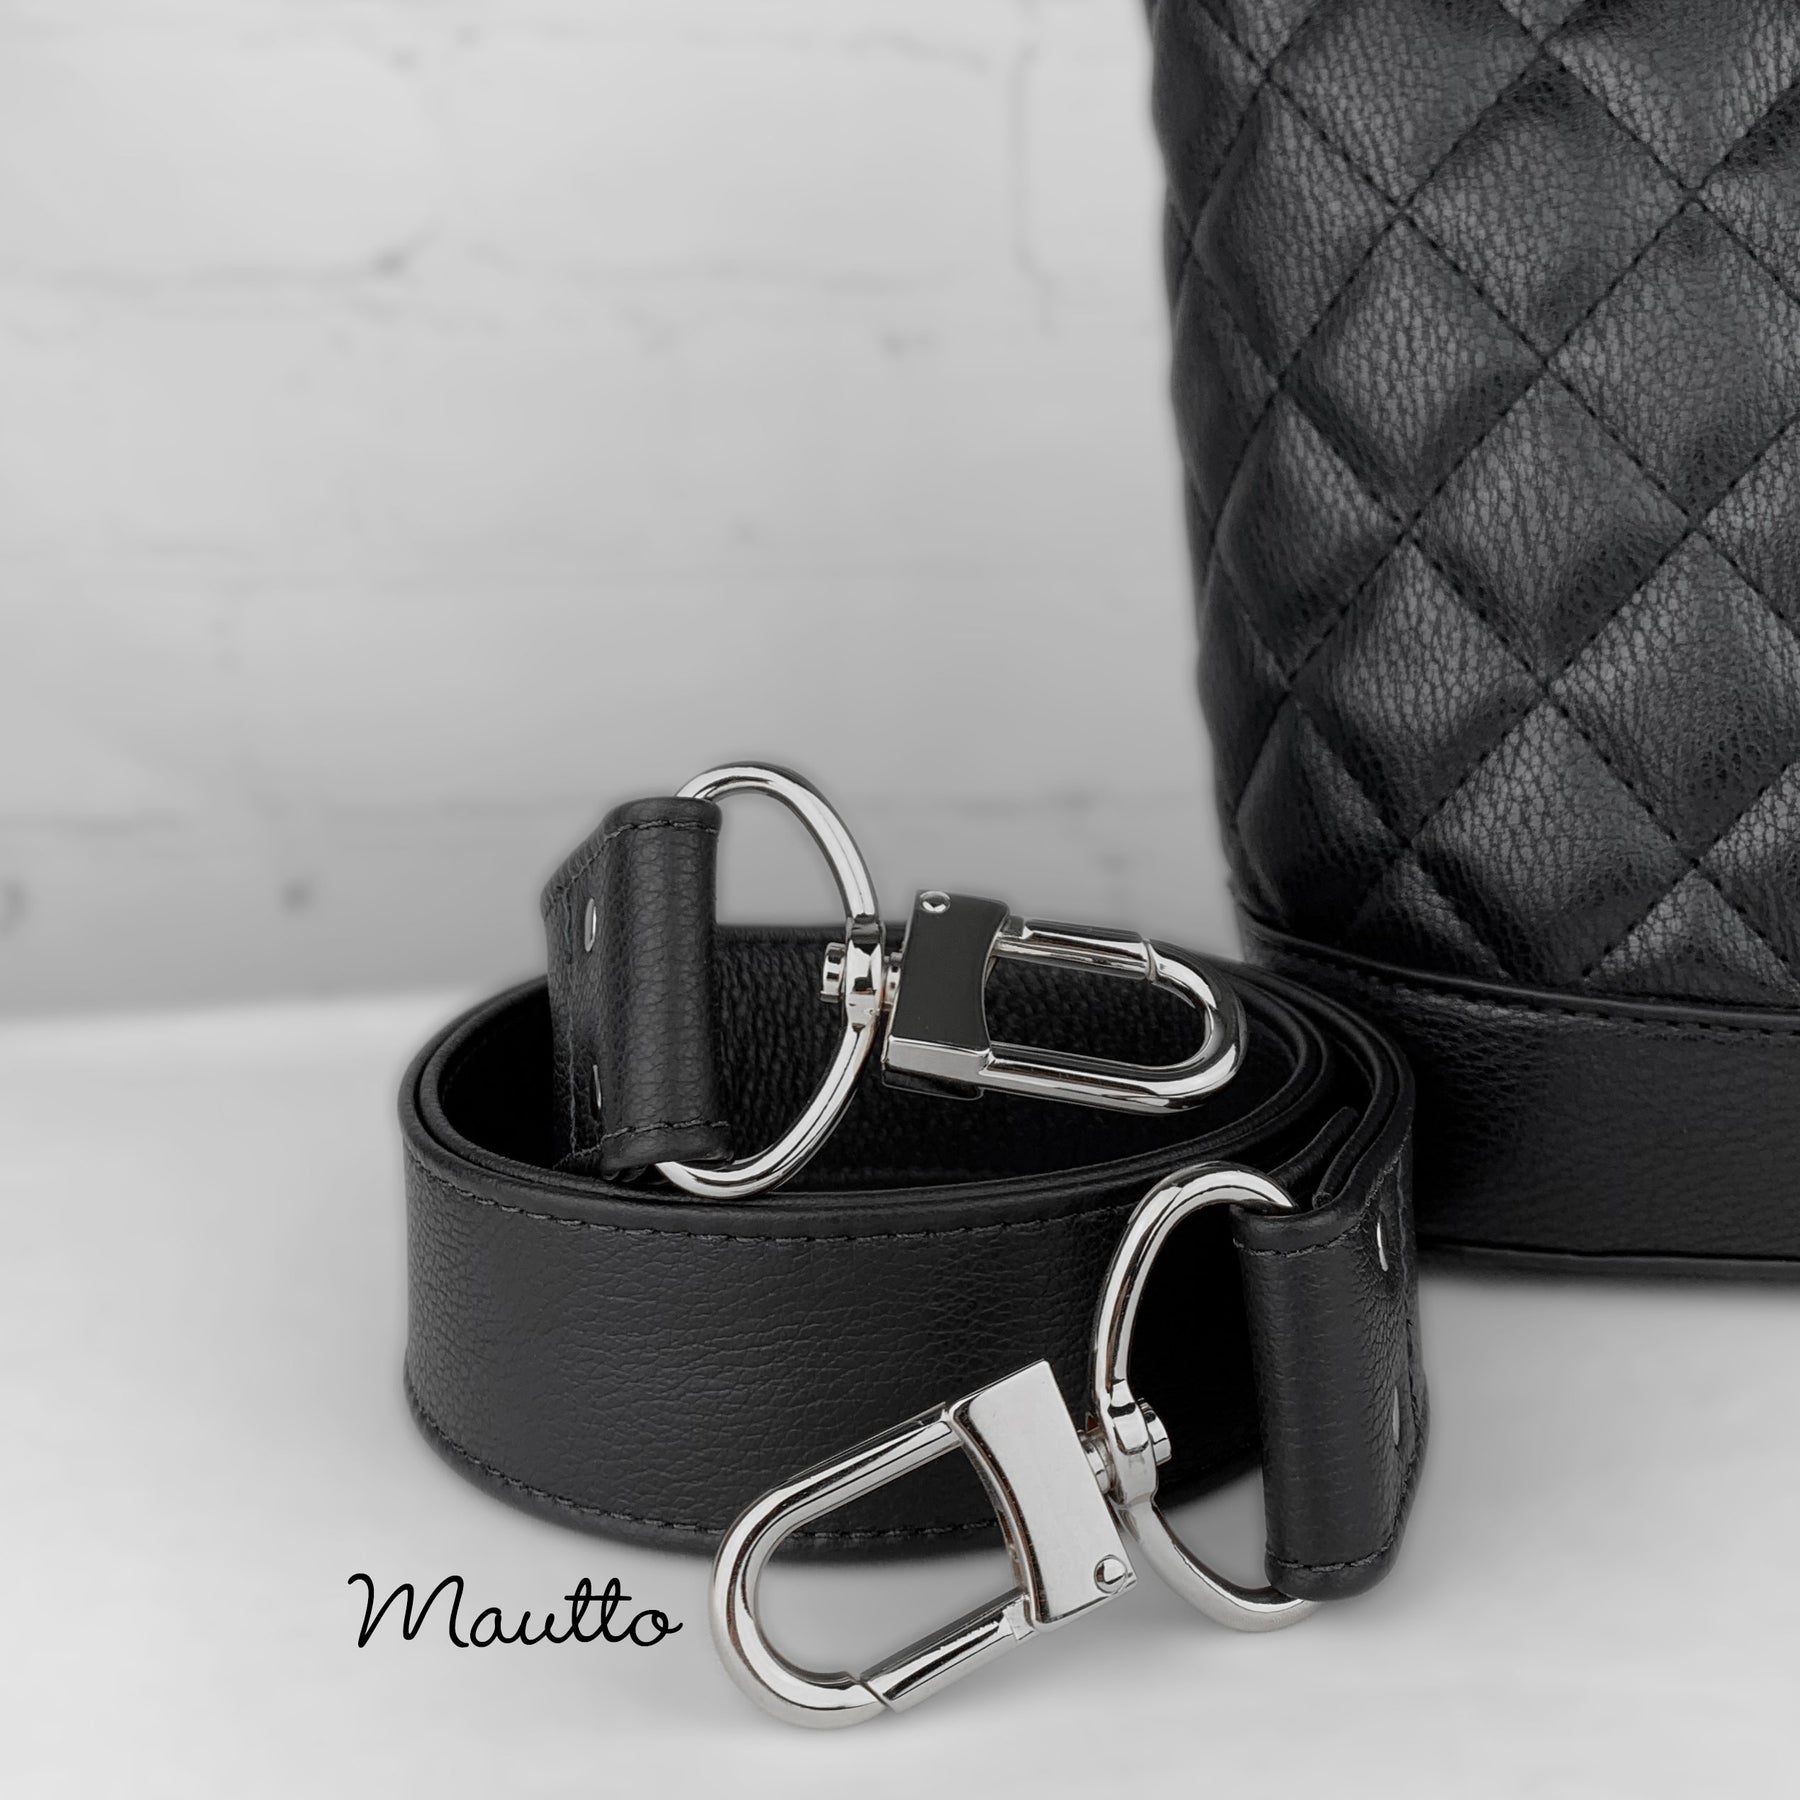 Wide Leather Shoulder Strap - Choose Leather Color & Silver-Tone Clips Dark Gray Leather / #19 Silver-Tone